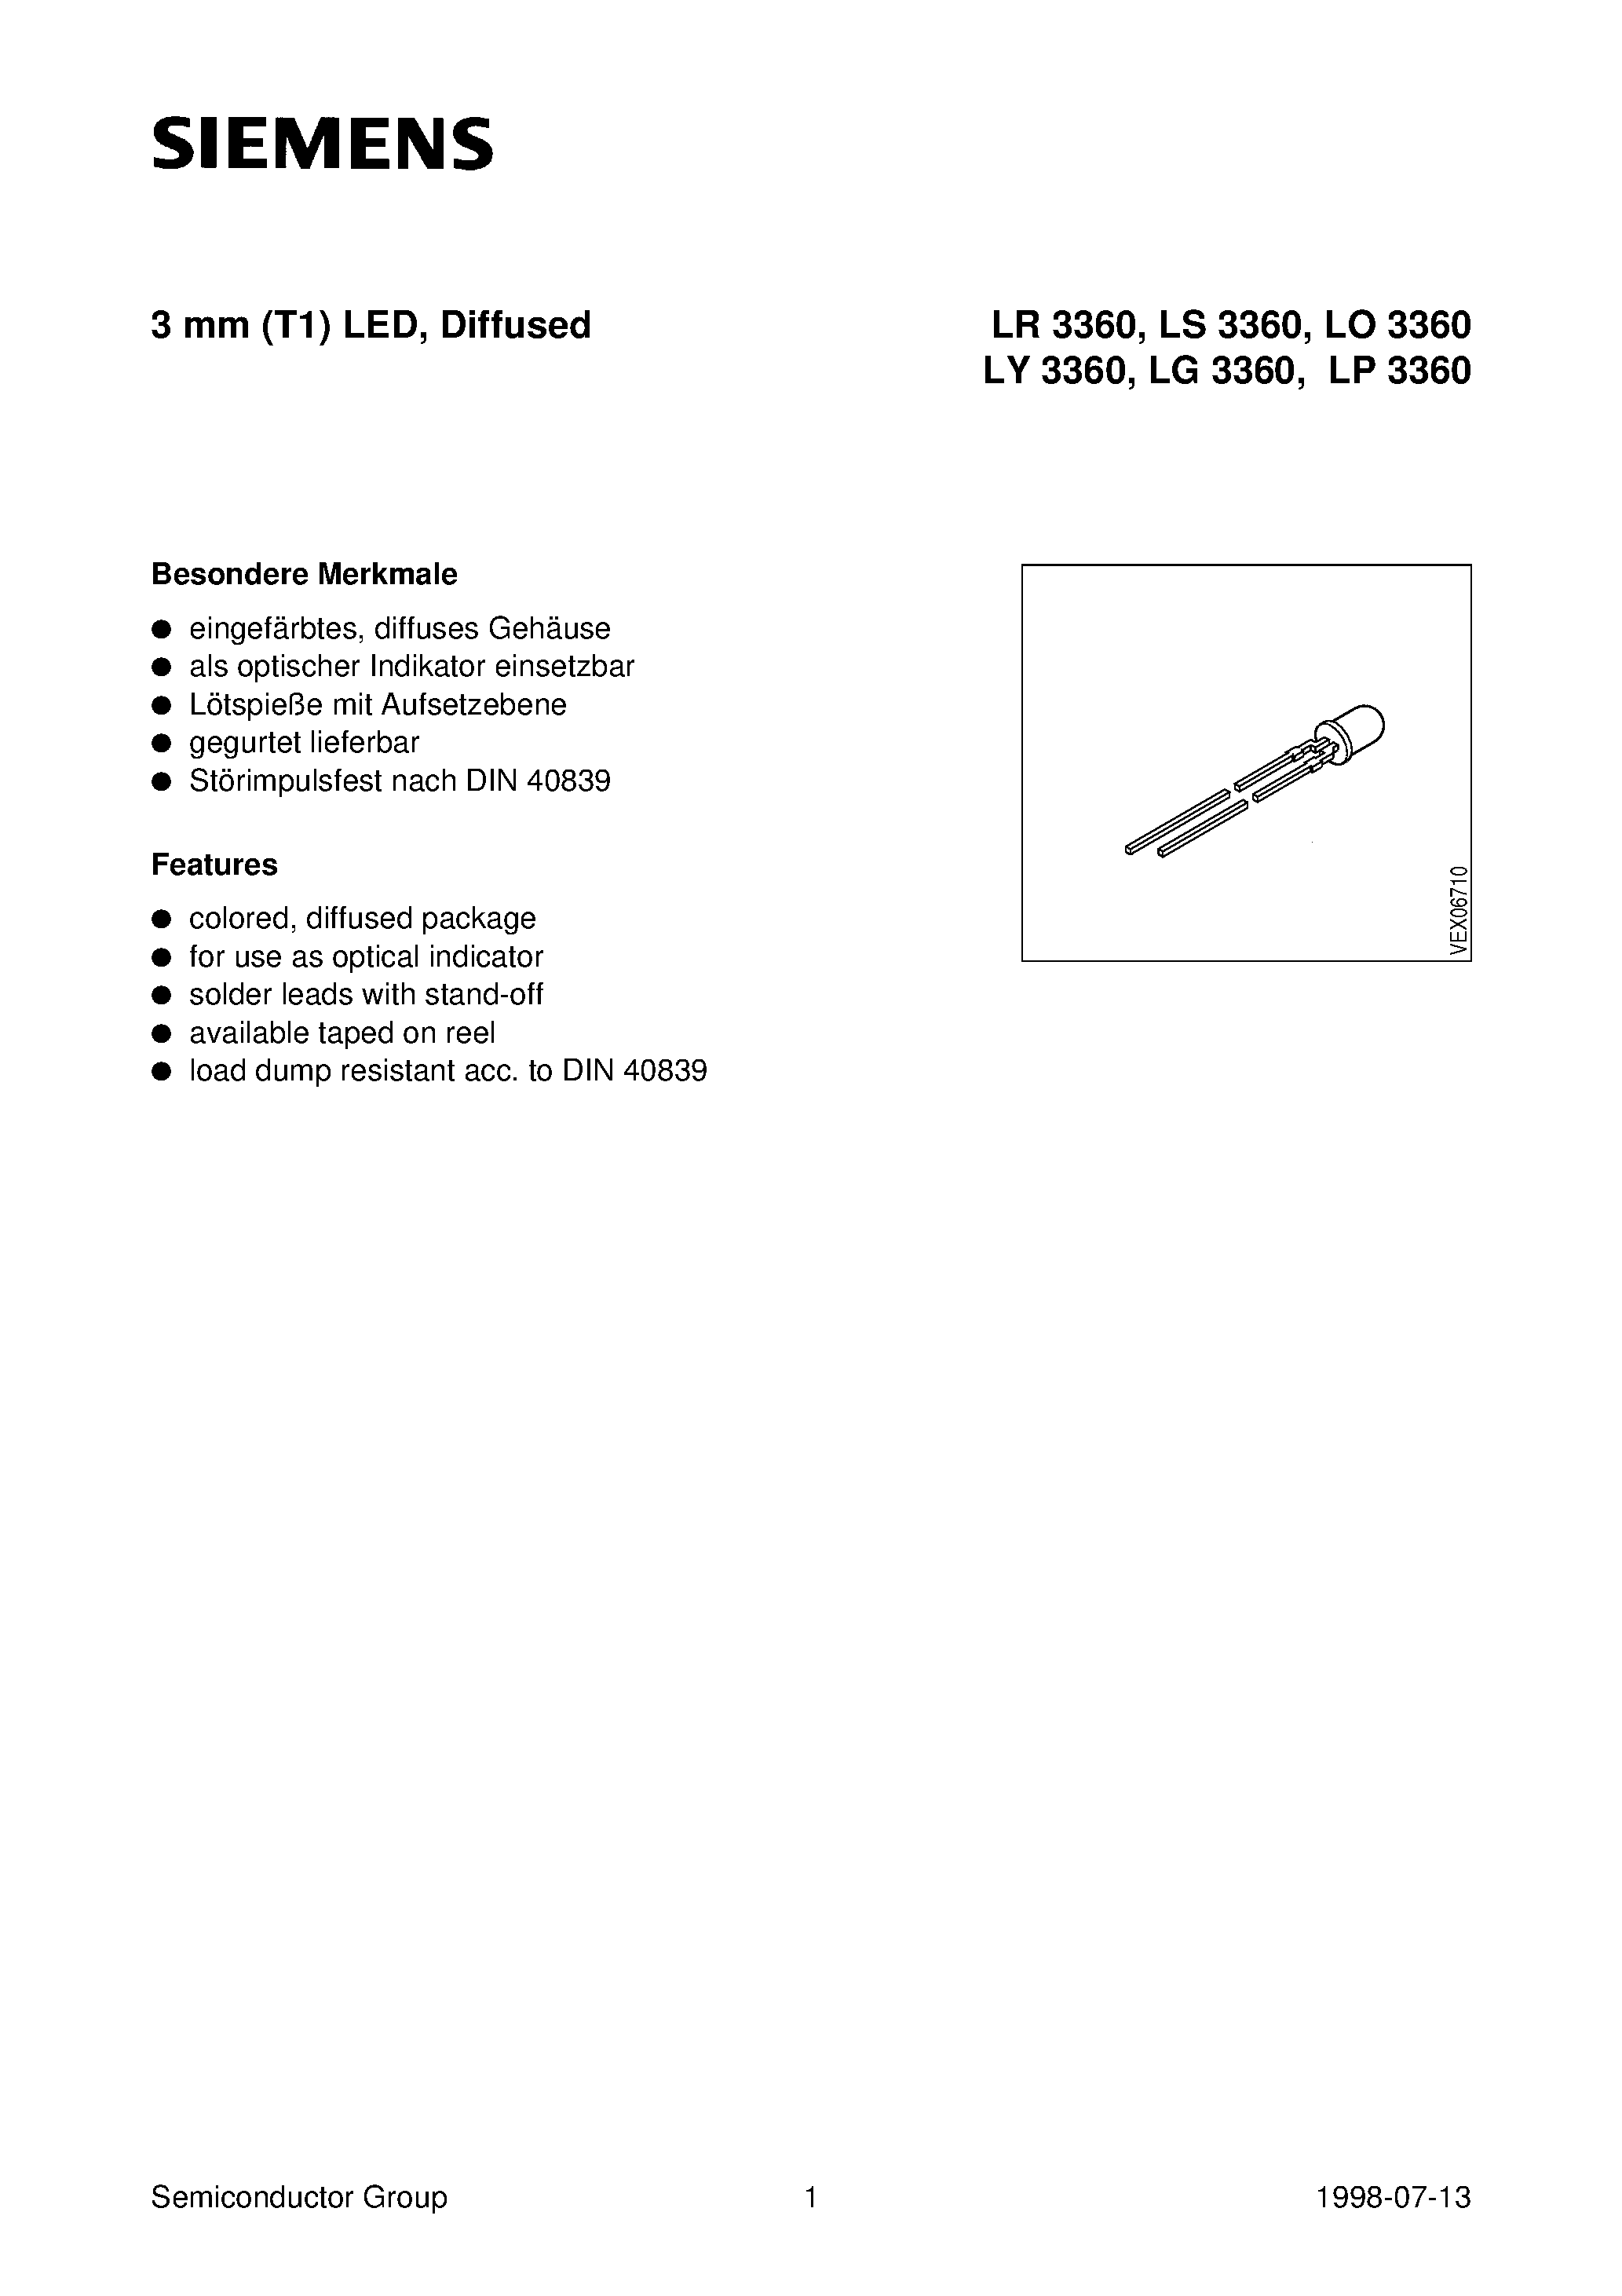 Datasheet LY3360-K - 3 mm (T1) LED/ Diffused page 1